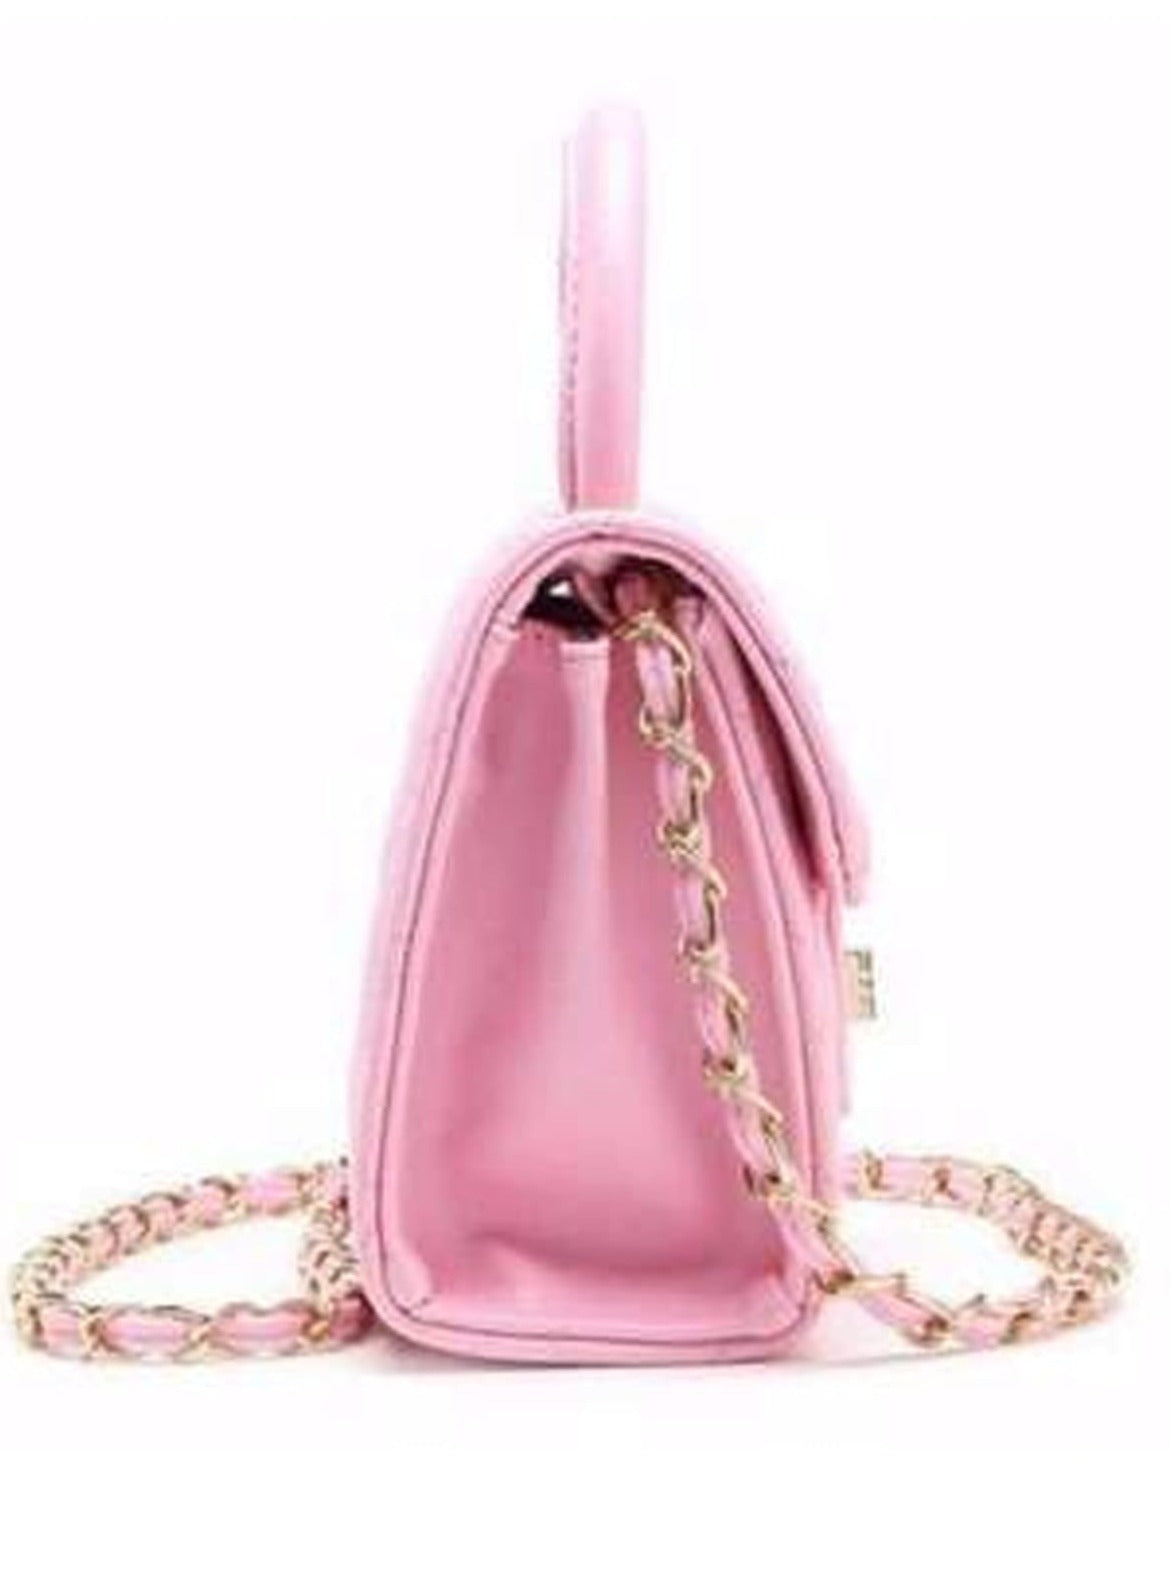 Kids Quilted Flap Shoulder Bag | Fashion Chain Purse - Mia Belle Girls Pink / One Size